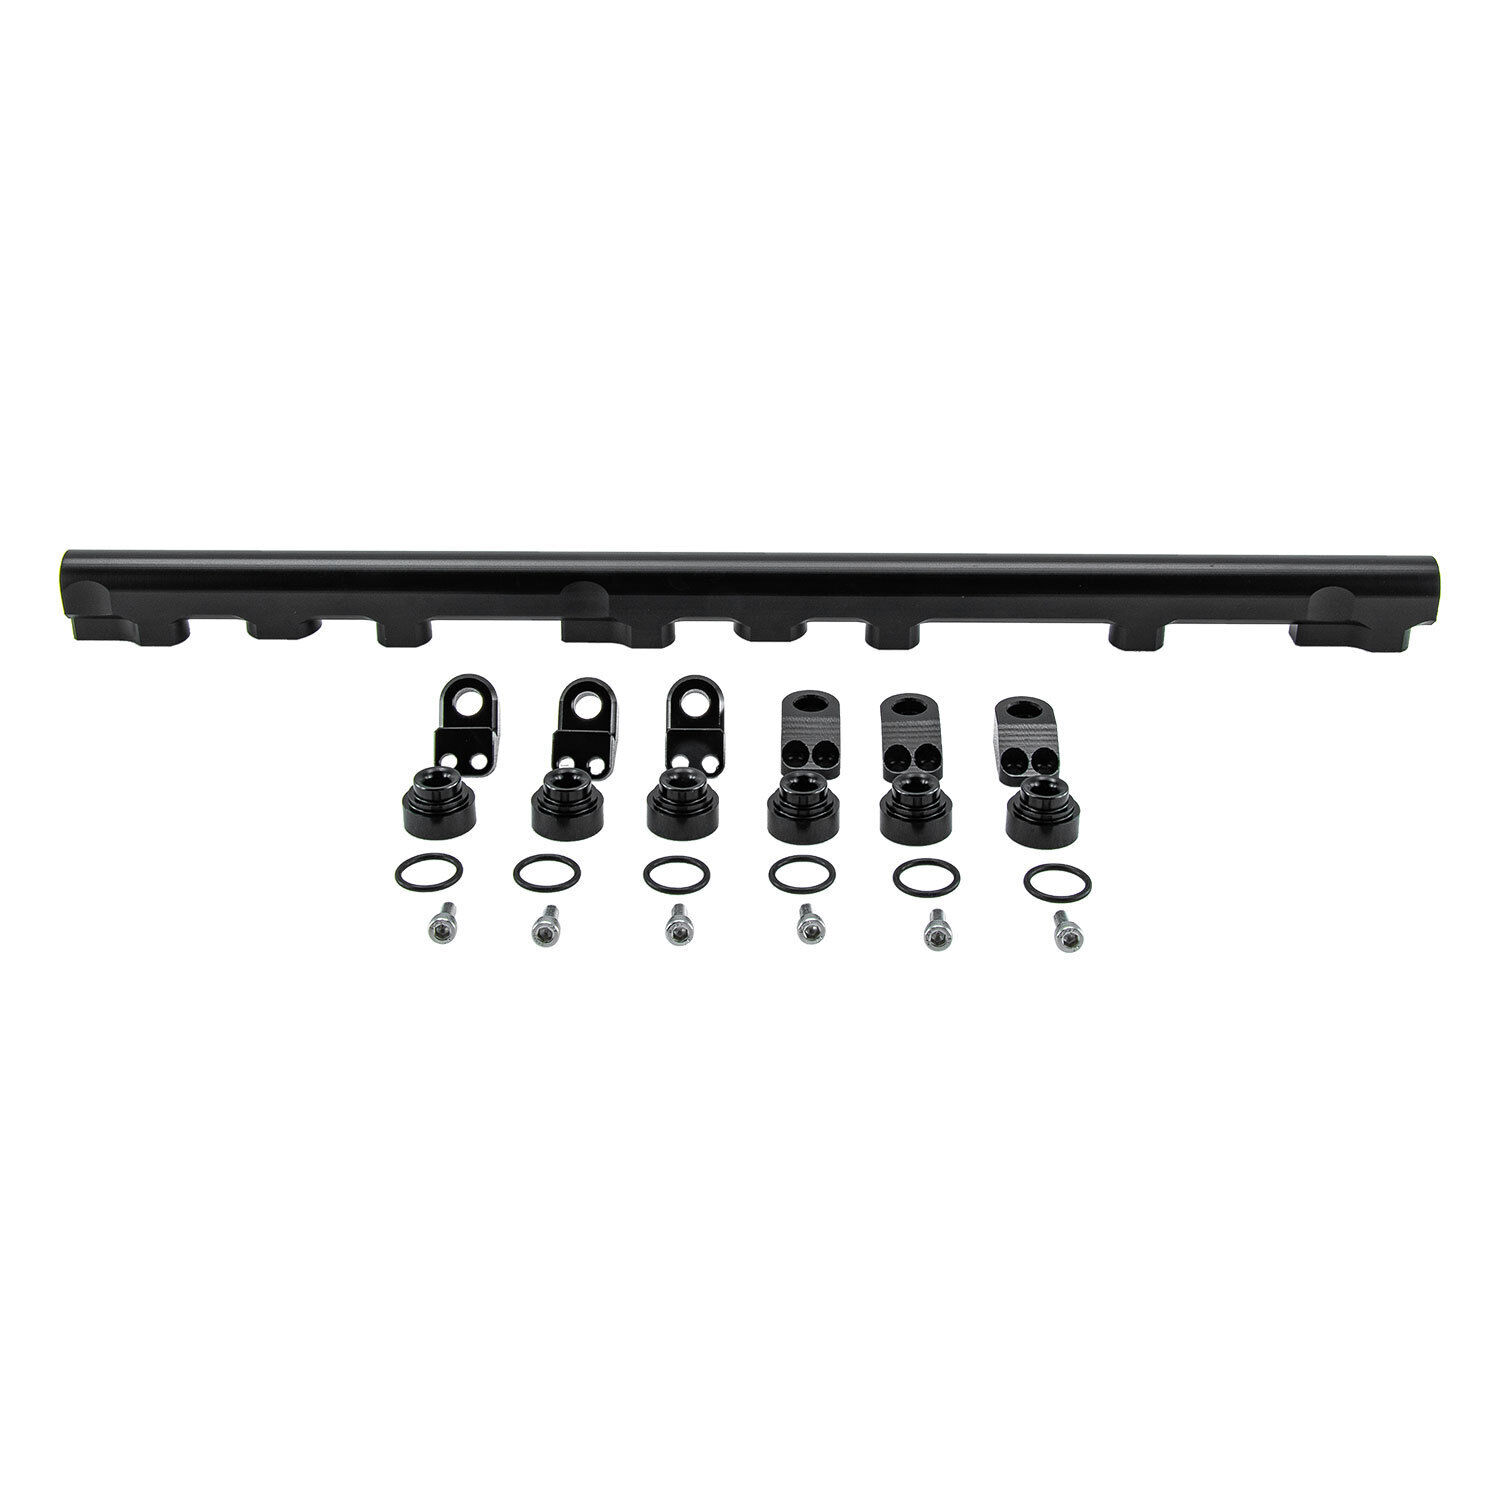 Top Feed Fuel Rail Conversion Kit for 86-92 Toyota Supra 1JZ-GTE Non VVT-i 6cyl